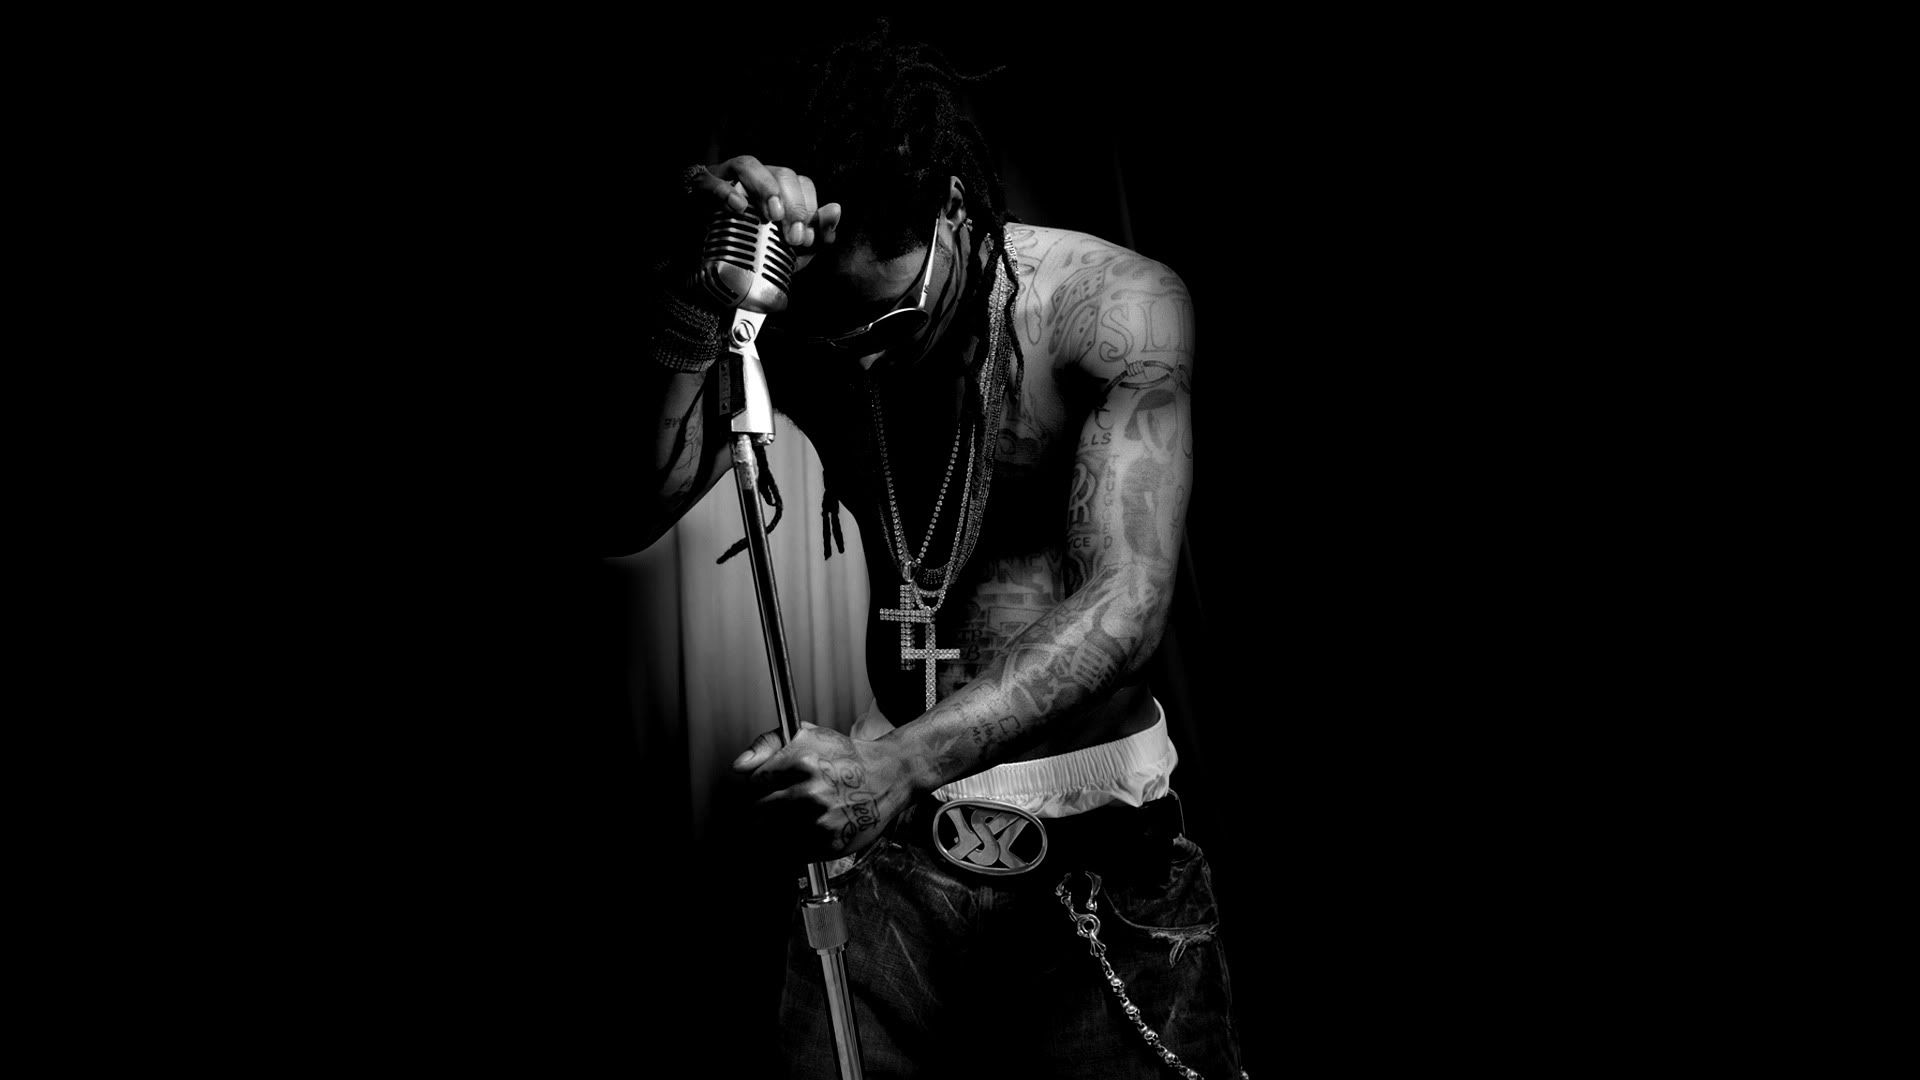 1451665 Lil Wayne wallpaper HD wallpapers backgrounds images 1920x1080